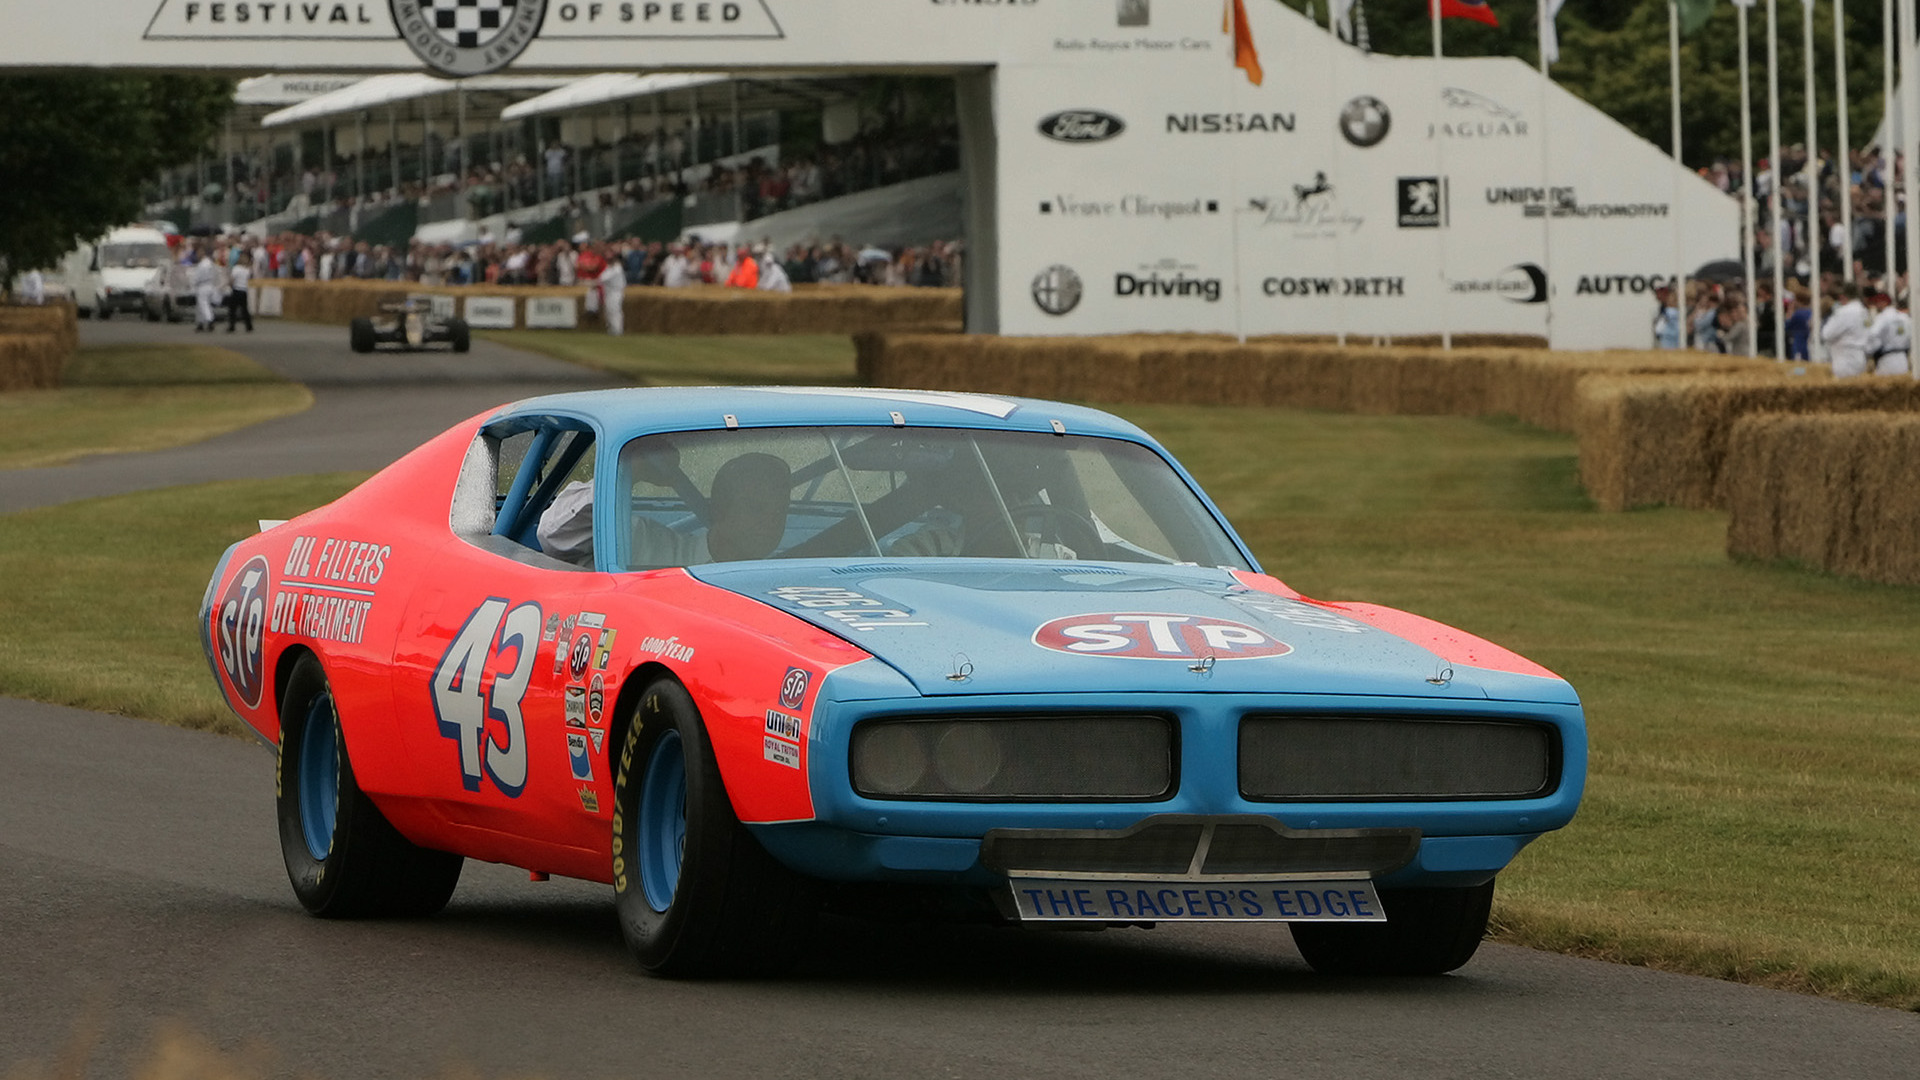  Wallpapers  Desktop on Dodge Charger Nascar Race Car Front And Hd Wallpaper Of Cars   Trucks